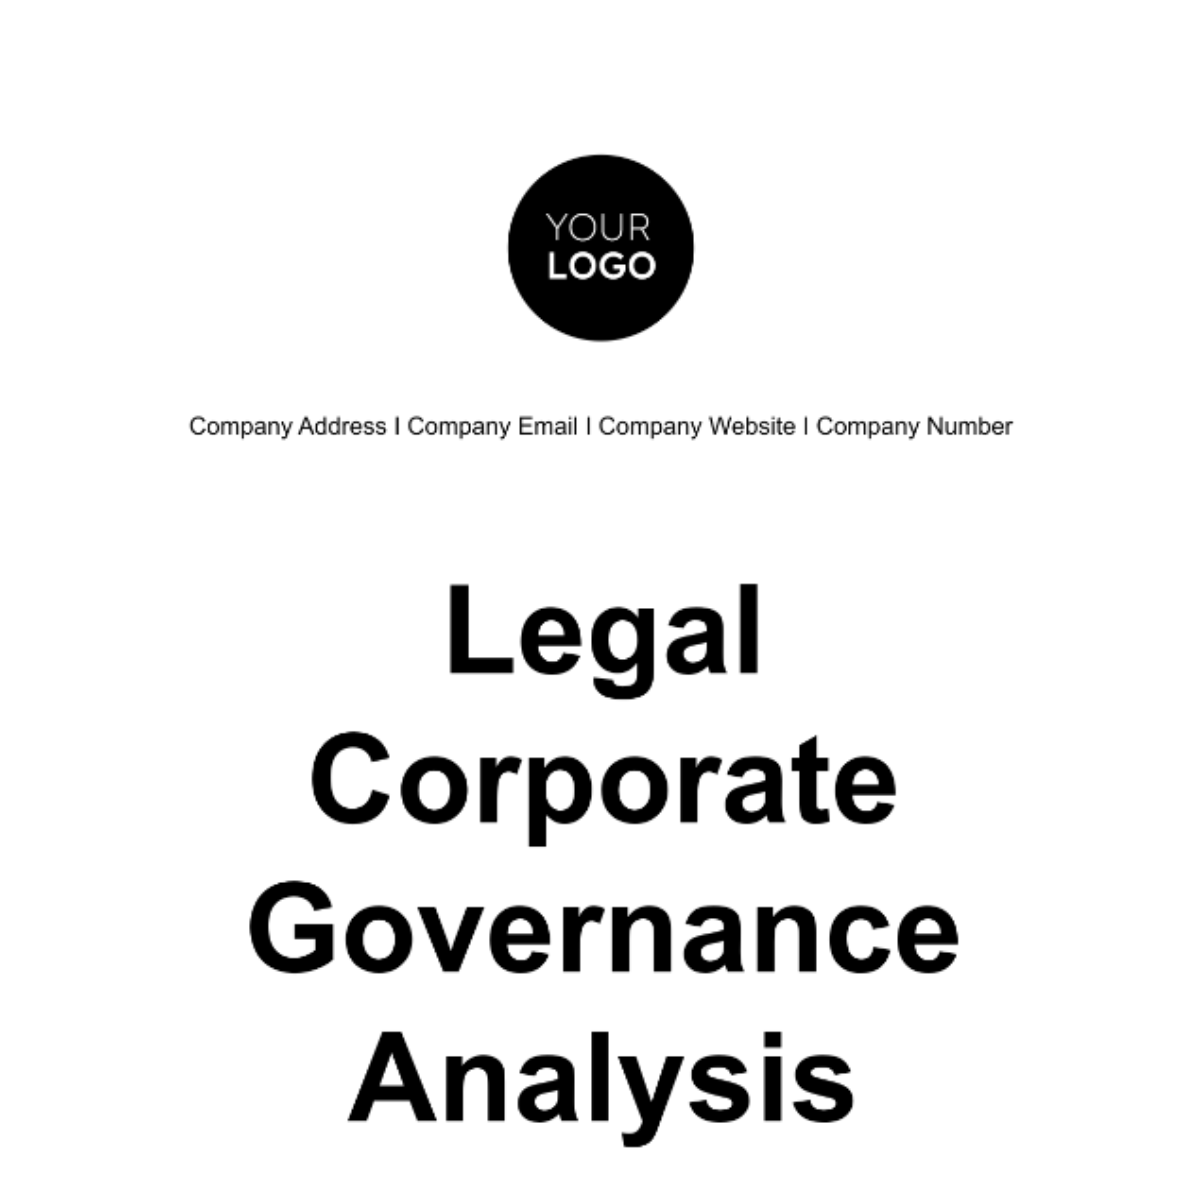 Legal Corporate Governance Analysis Template